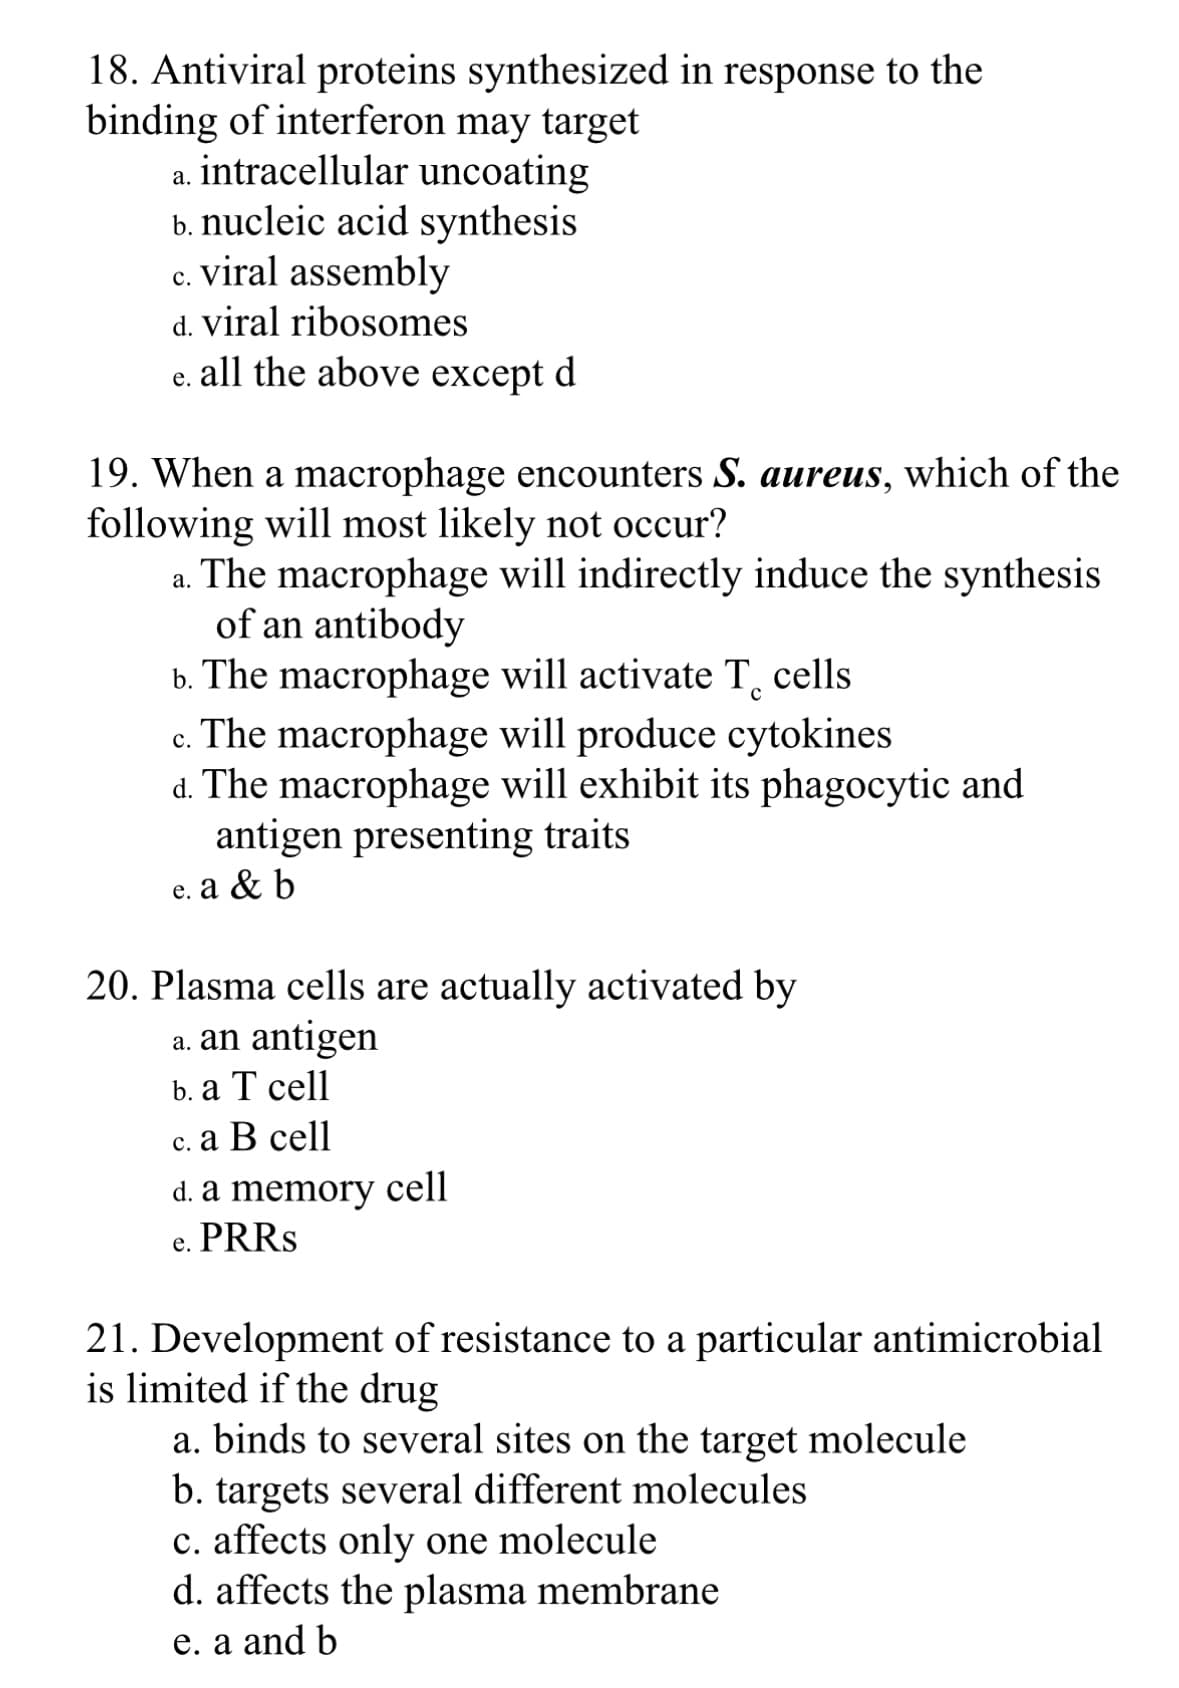 18. Antiviral proteins synthesized in response to the
binding of interferon may target
a. intracellular uncoating
b. nucleic acid synthesis
c. viral assembly
C.
d. viral ribosomes
e. all the above except d
19. When a macrophage encounters S. aureus, which of the
following will most likely not occur?
a.
The macrophage will indirectly induce the synthesis
of an antibody
b. The macrophage will activate T cells
C.
The macrophage will produce cytokines
d. The macrophage will exhibit its phagocytic and
antigen presenting traits
e. a & b
20. Plasma cells are actually activated by
a. an antigen
b. a T cell
c. a B cell
d. a memory cell
PRRS
e.
21. Development of resistance to a particular antimicrobial
is limited if the drug
a. binds to several sites on the target molecule
b. targets several different molecules
c. affects only one molecule
d. affects the plasma membrane
e. a and b